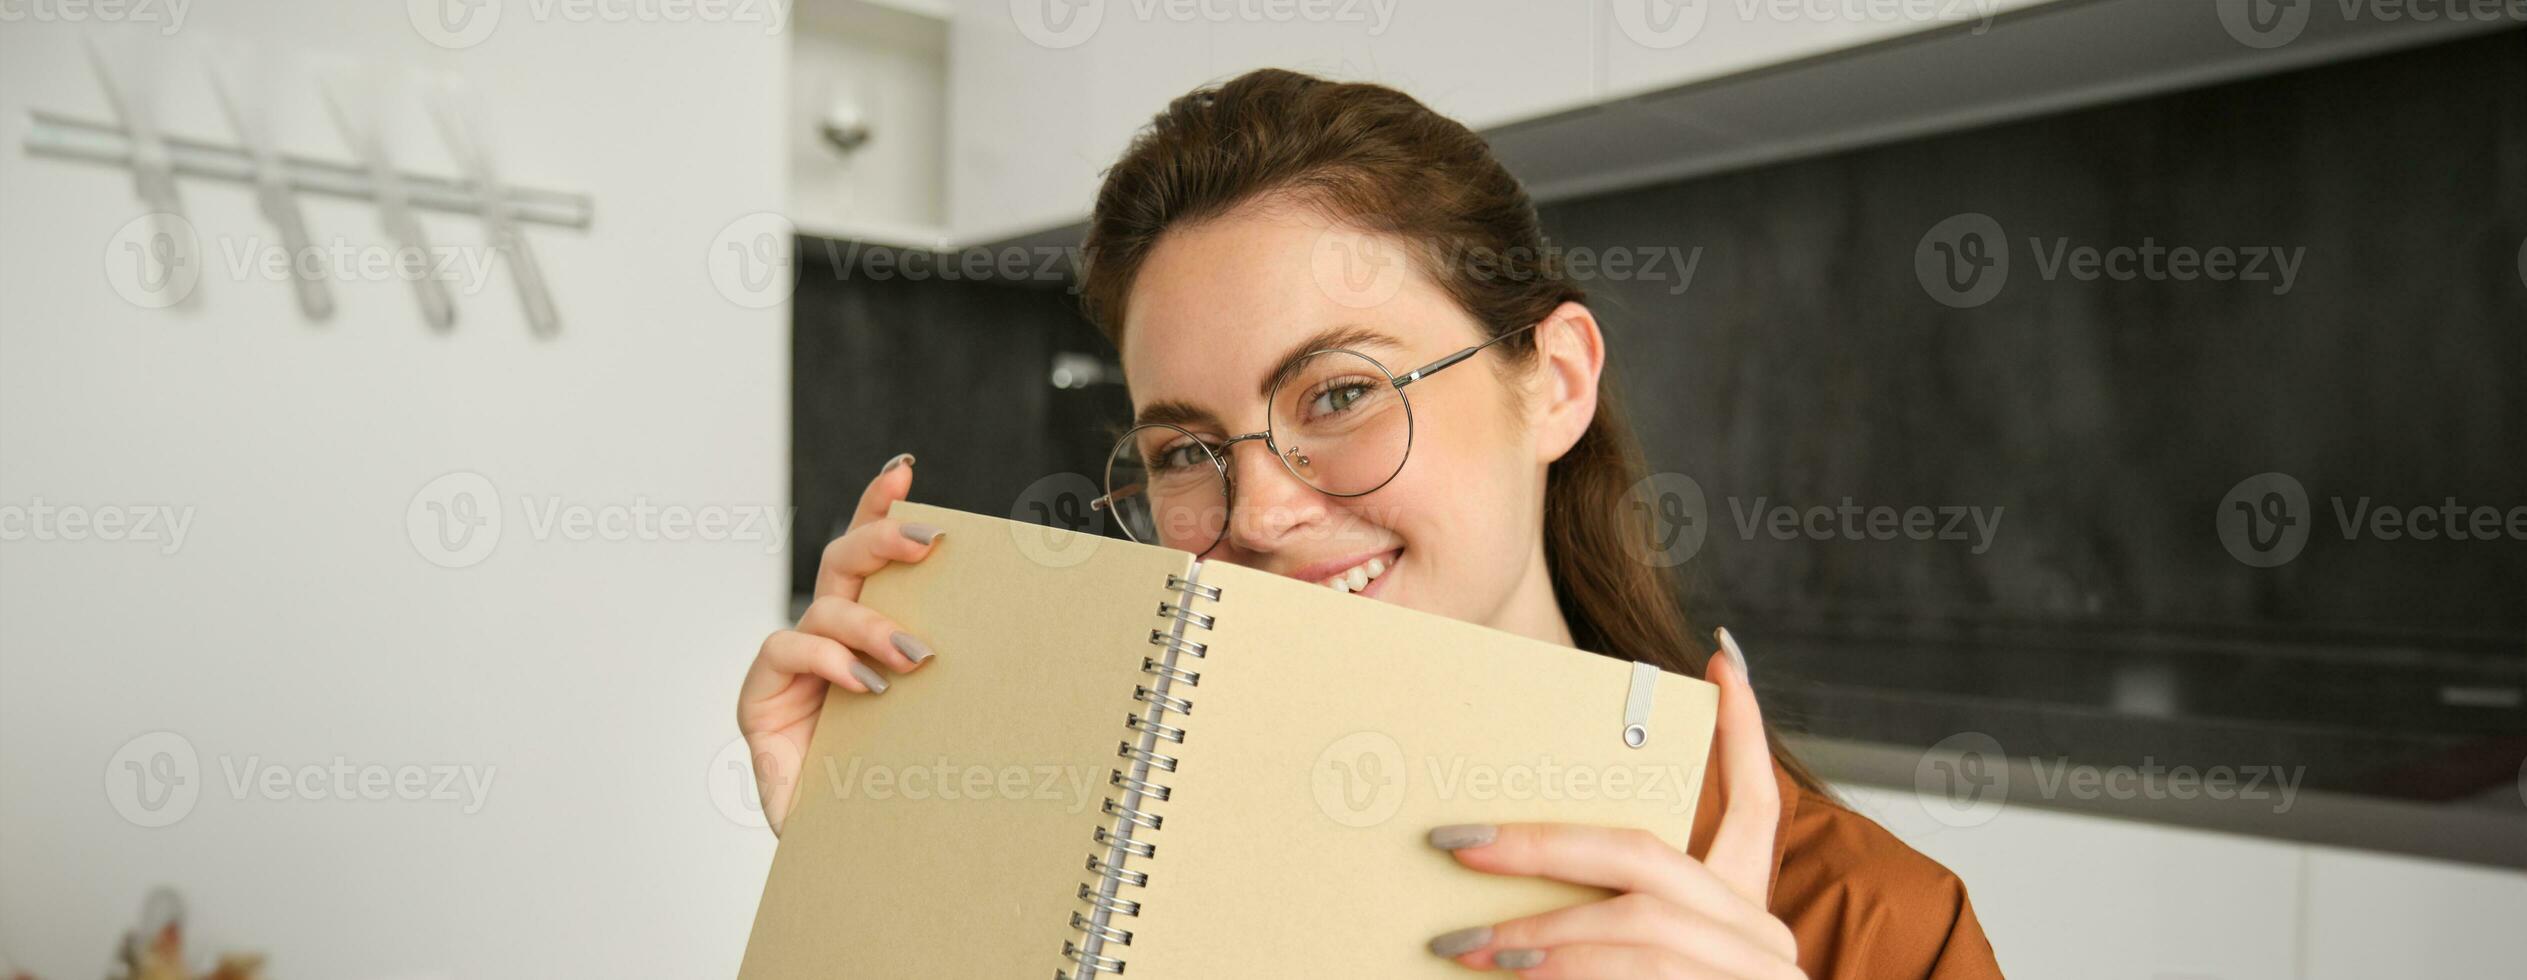 Close up portrait of young woman smiling, holding notebook, showing her planner photo